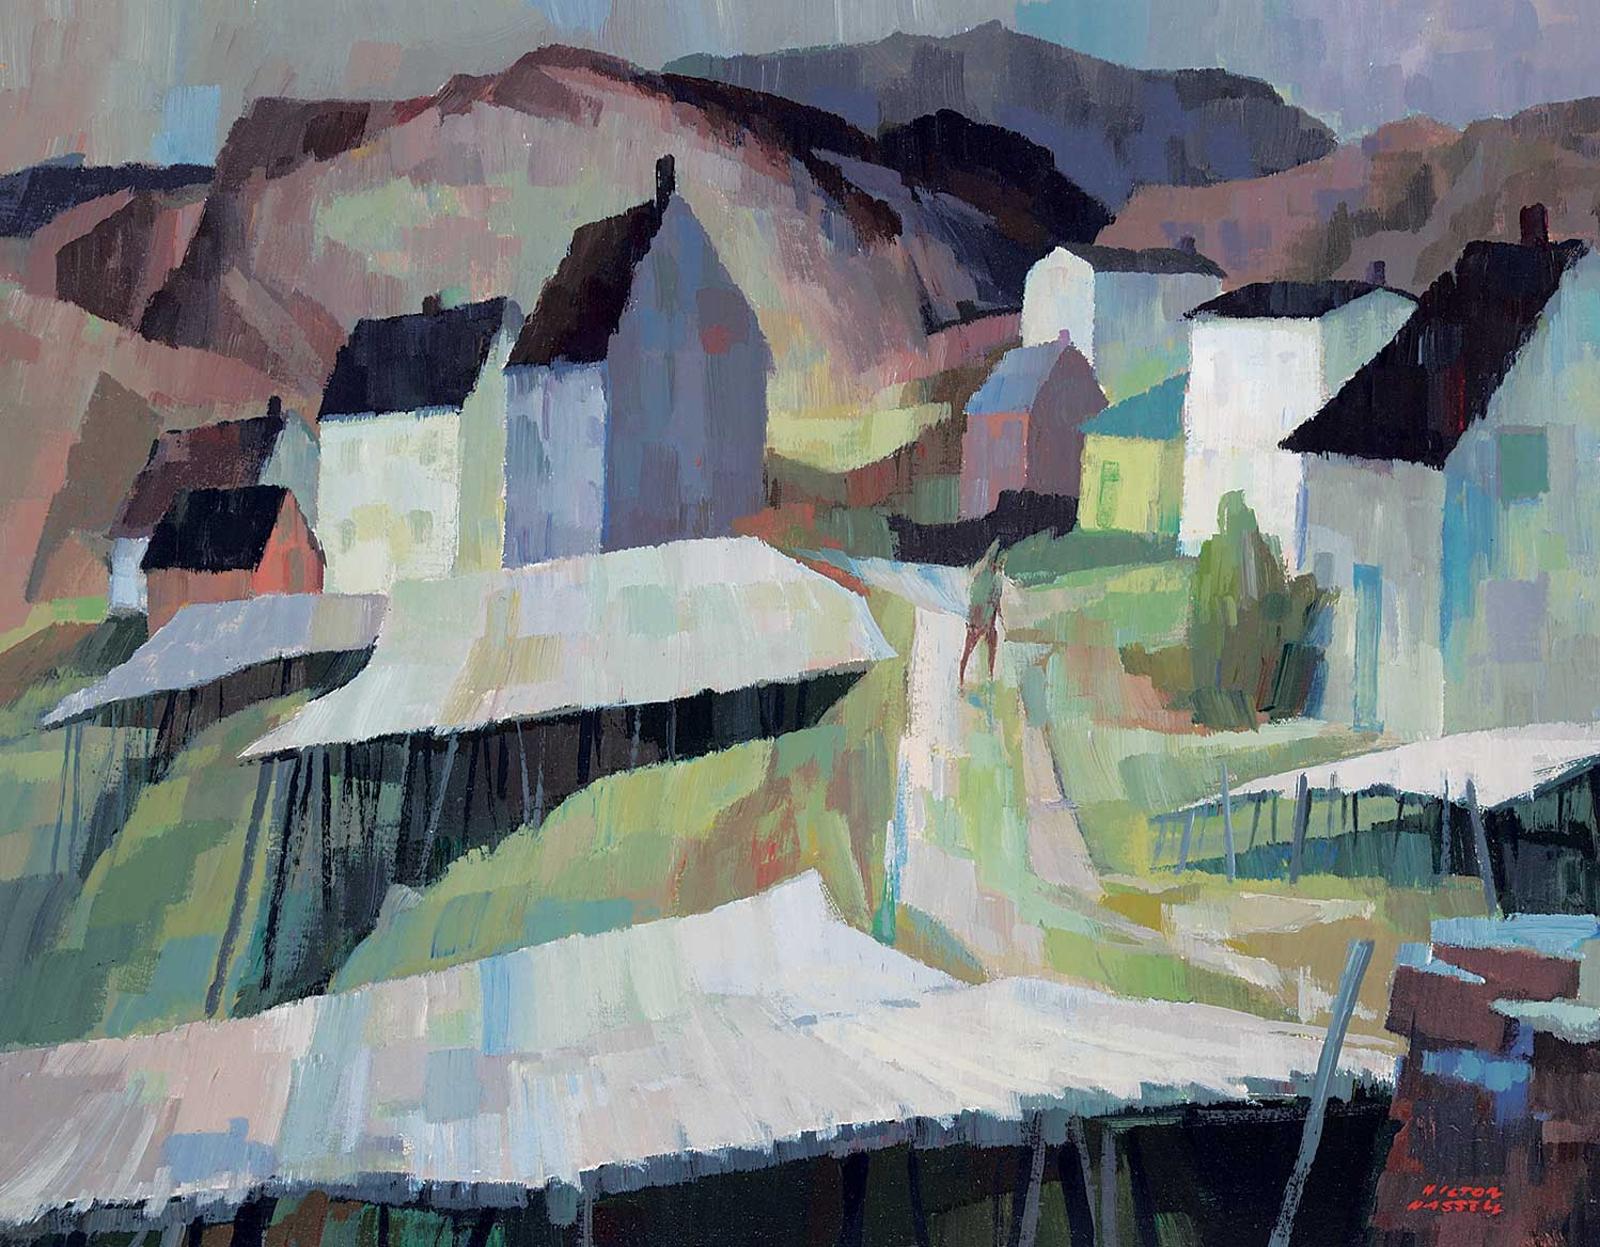 Hilton MacDonald Hassell (1910-1980) - Brigus, Conception Bay, Nfld.